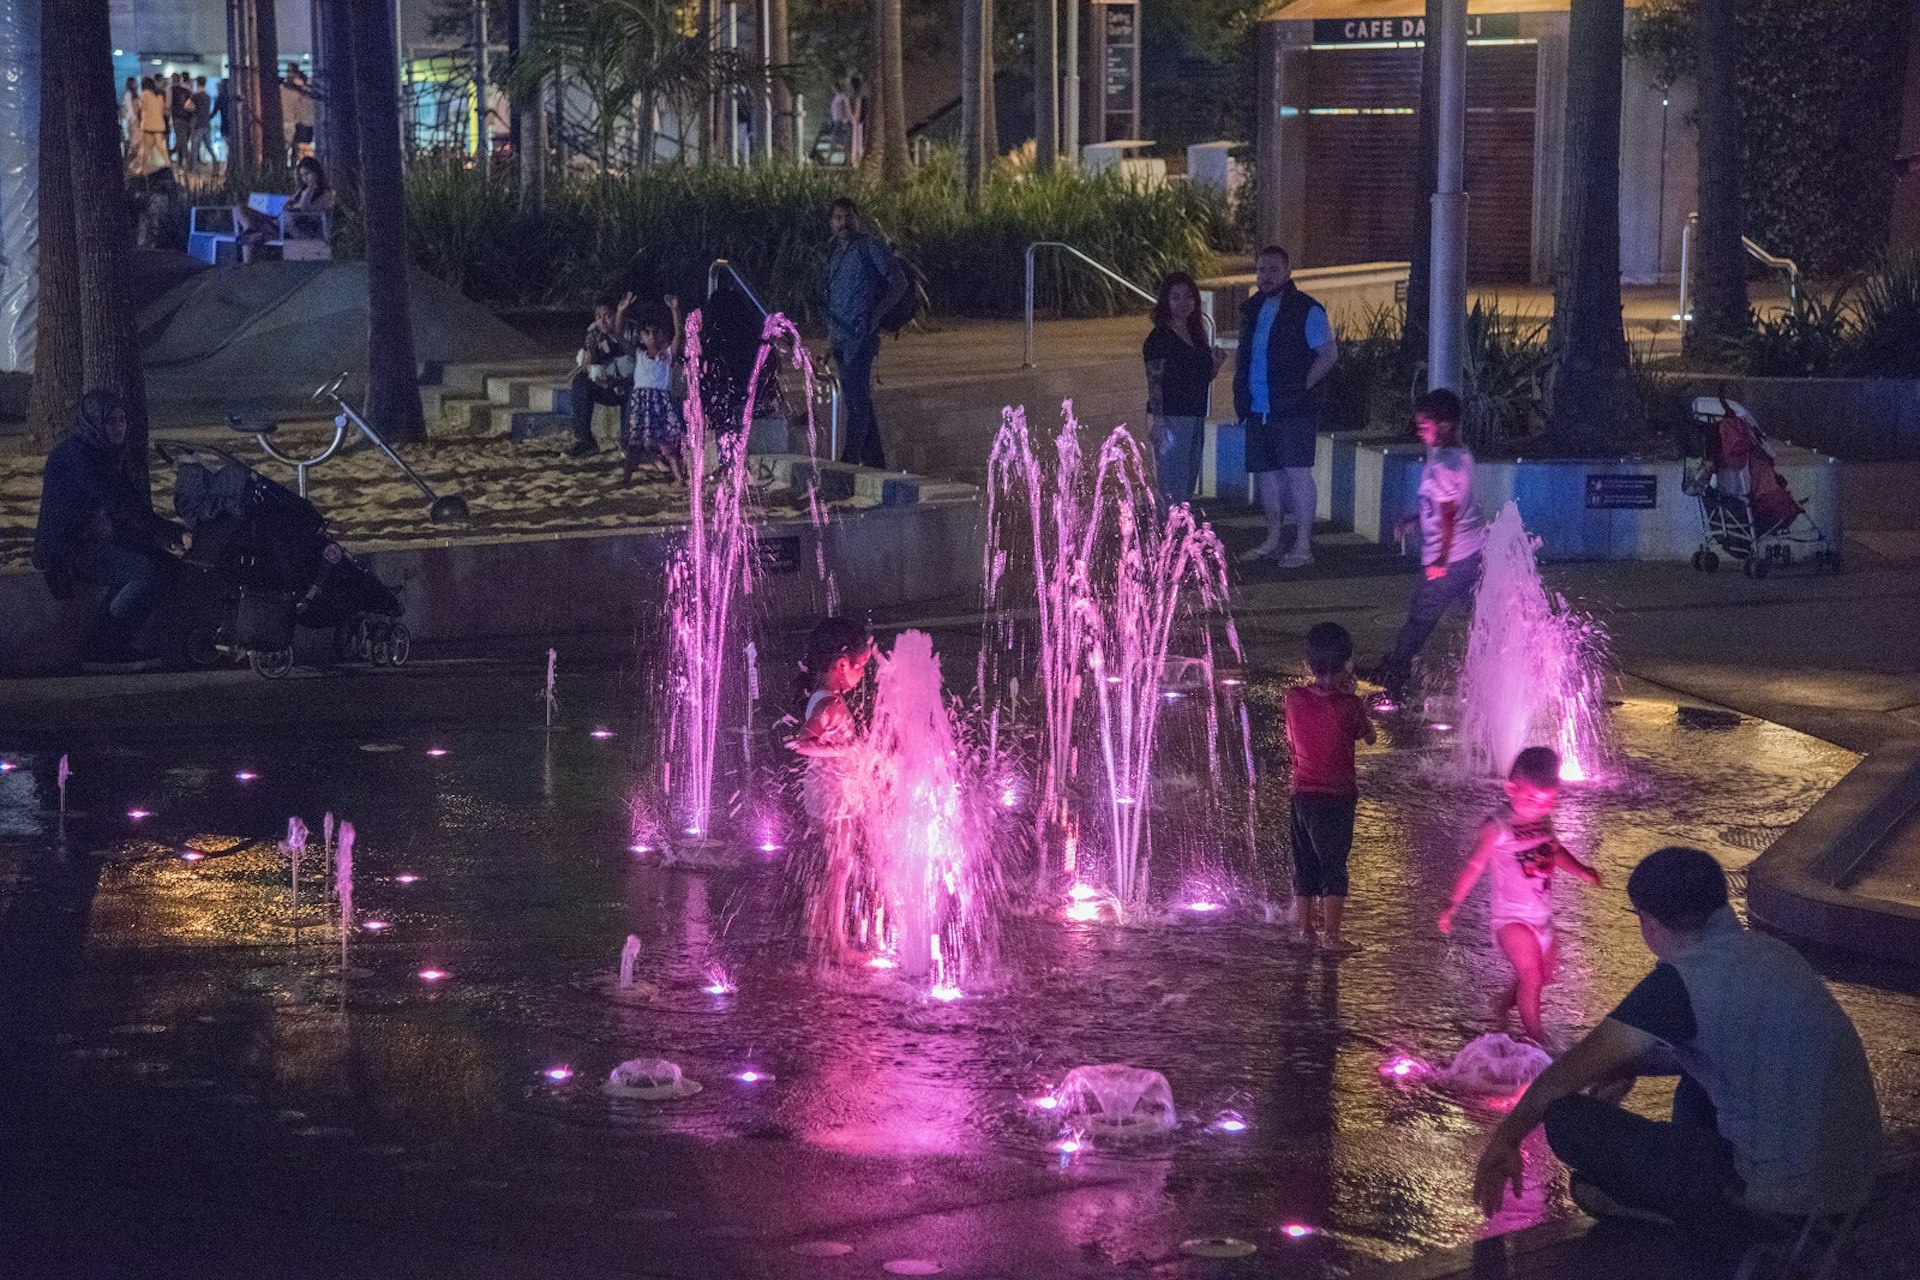 Several jets of water are illuminated pink in the darkness as three children play in the fountain